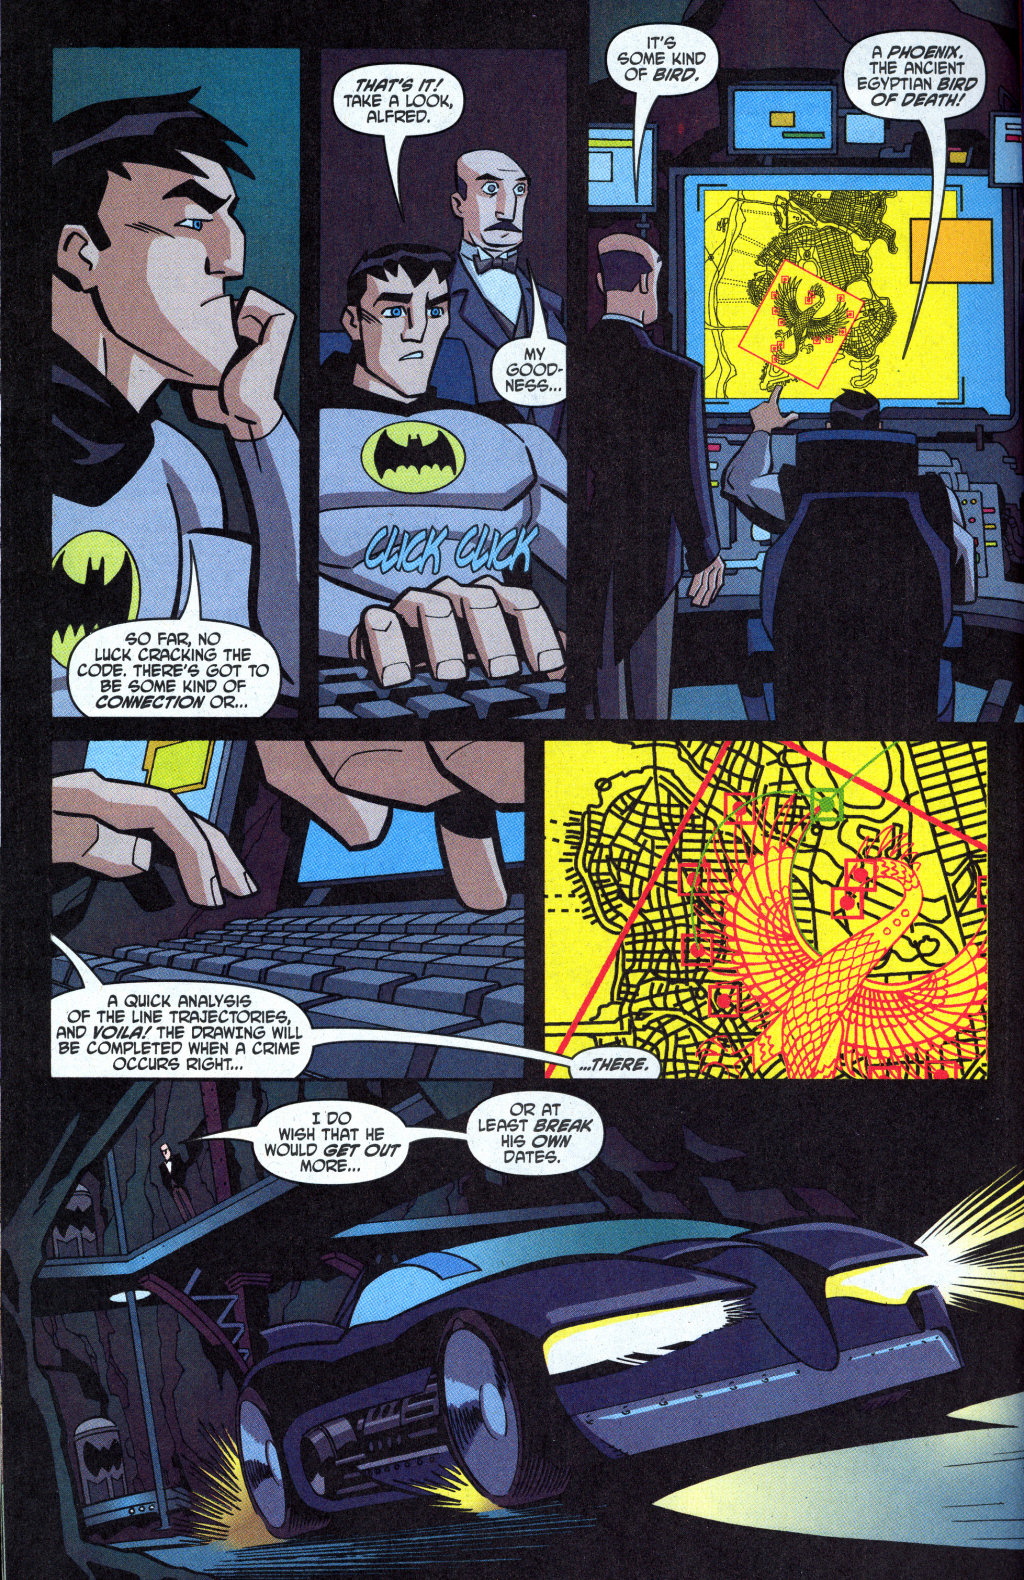 The Batman Strikes! issue 1 (Burger King Giveaway Edition) - Page 14